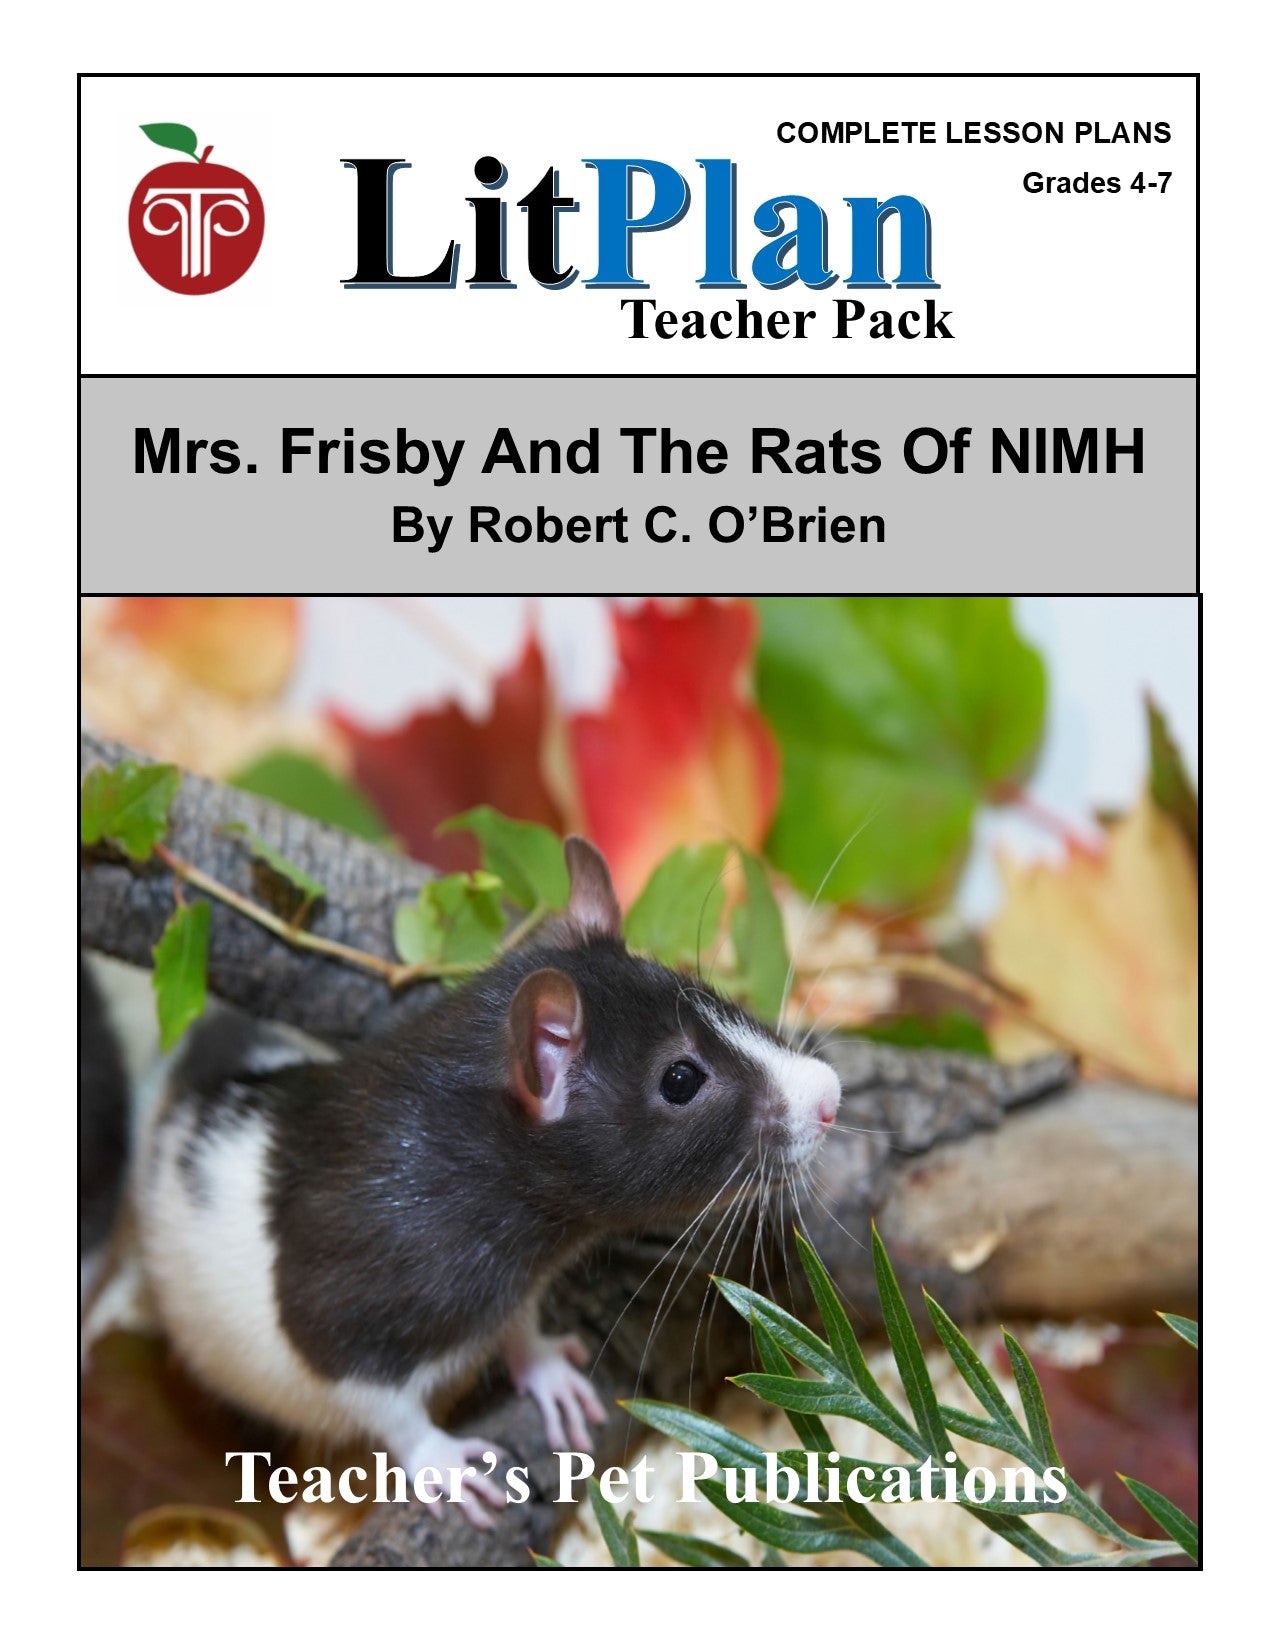 Mrs. Frisby and the Rats of NIMH: LitPlan Teacher Pack Grades 4-7